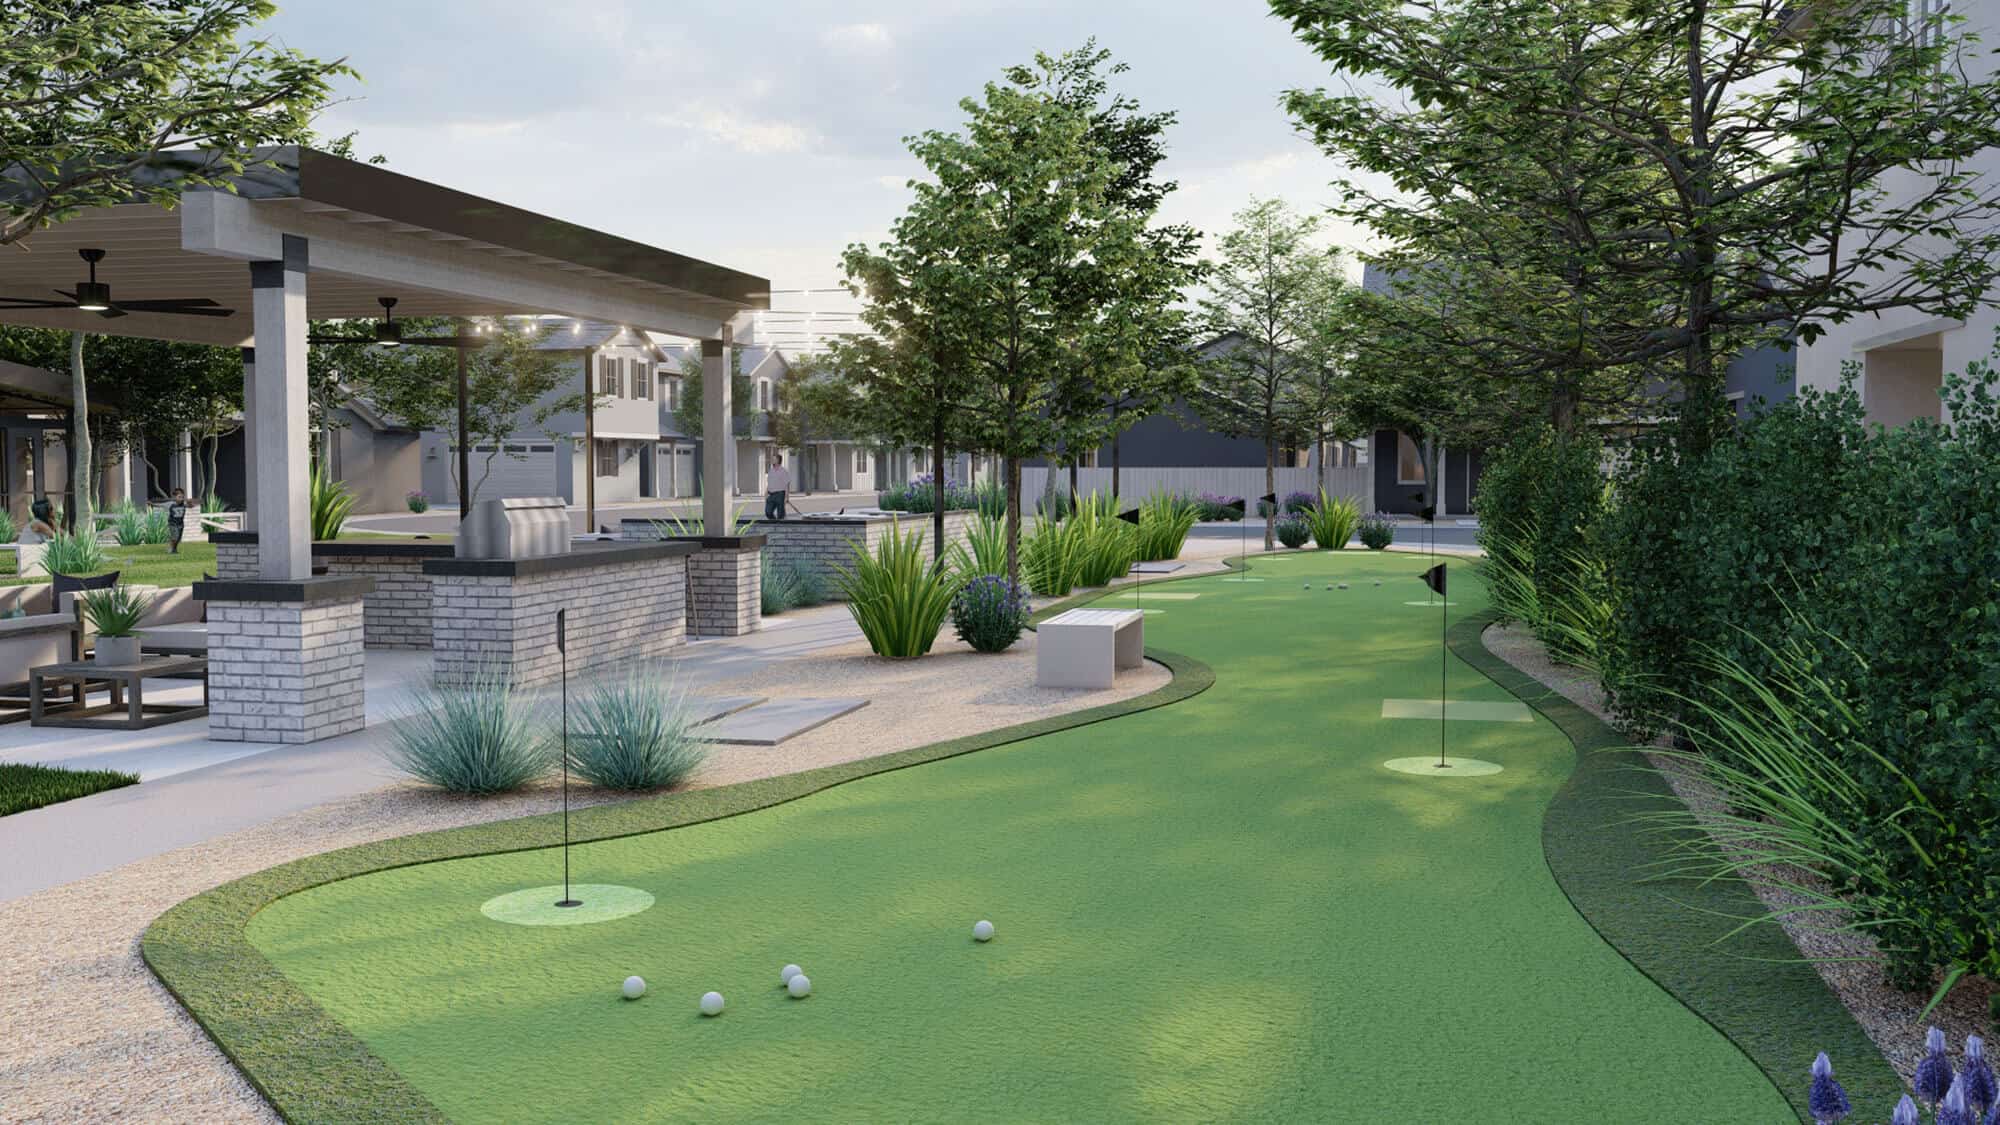 Rendering of a small outdoor golf putting area